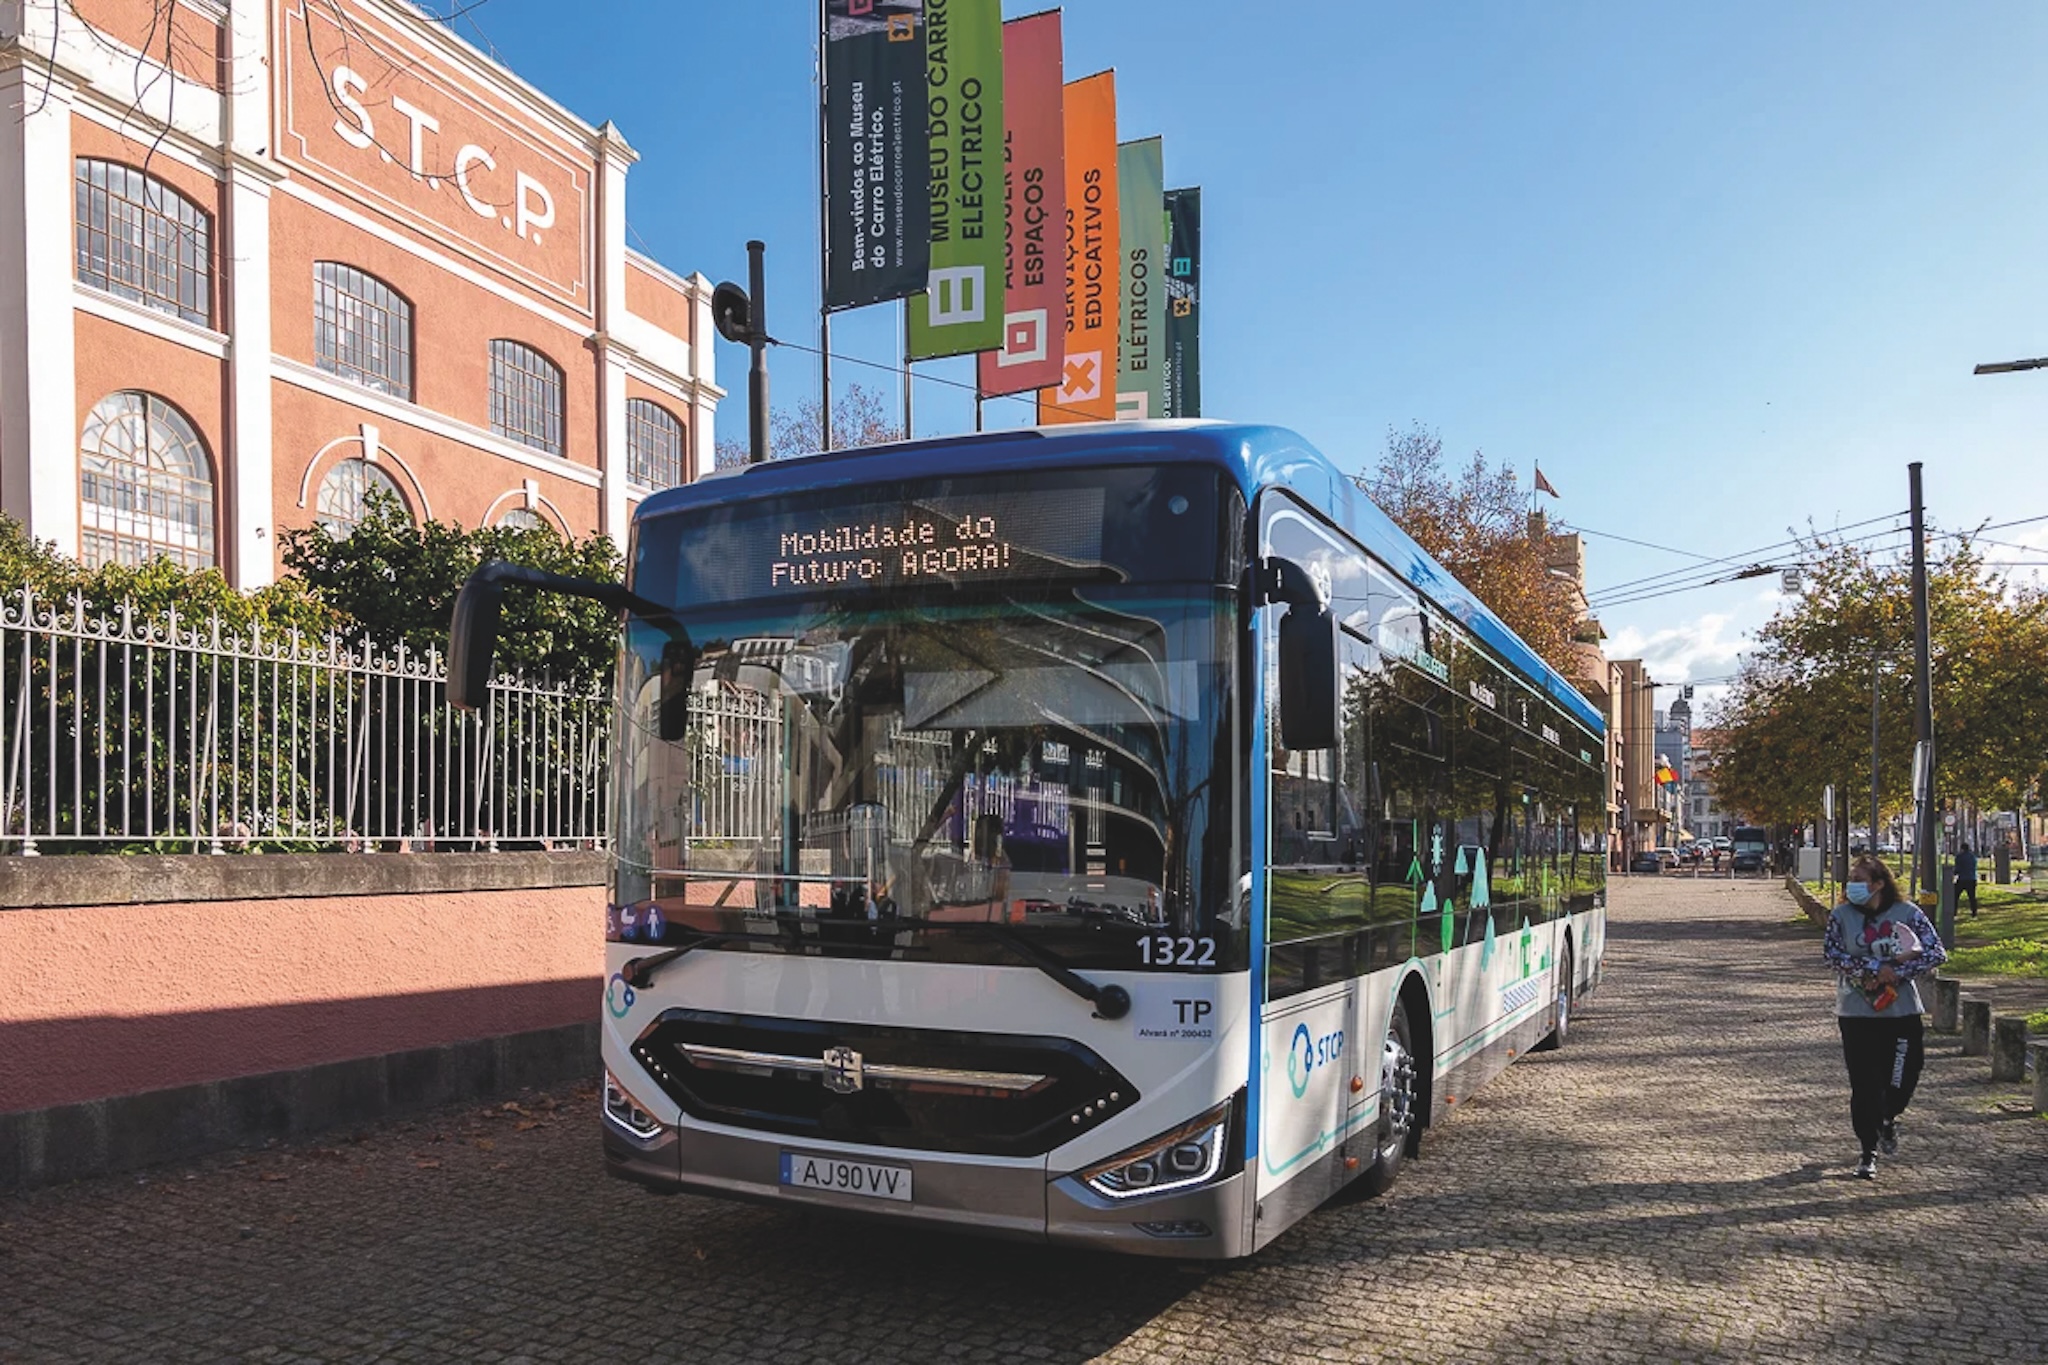 The fully electric Zhongtong Buses will provide quality transit while cutting CO2 emissions in the city